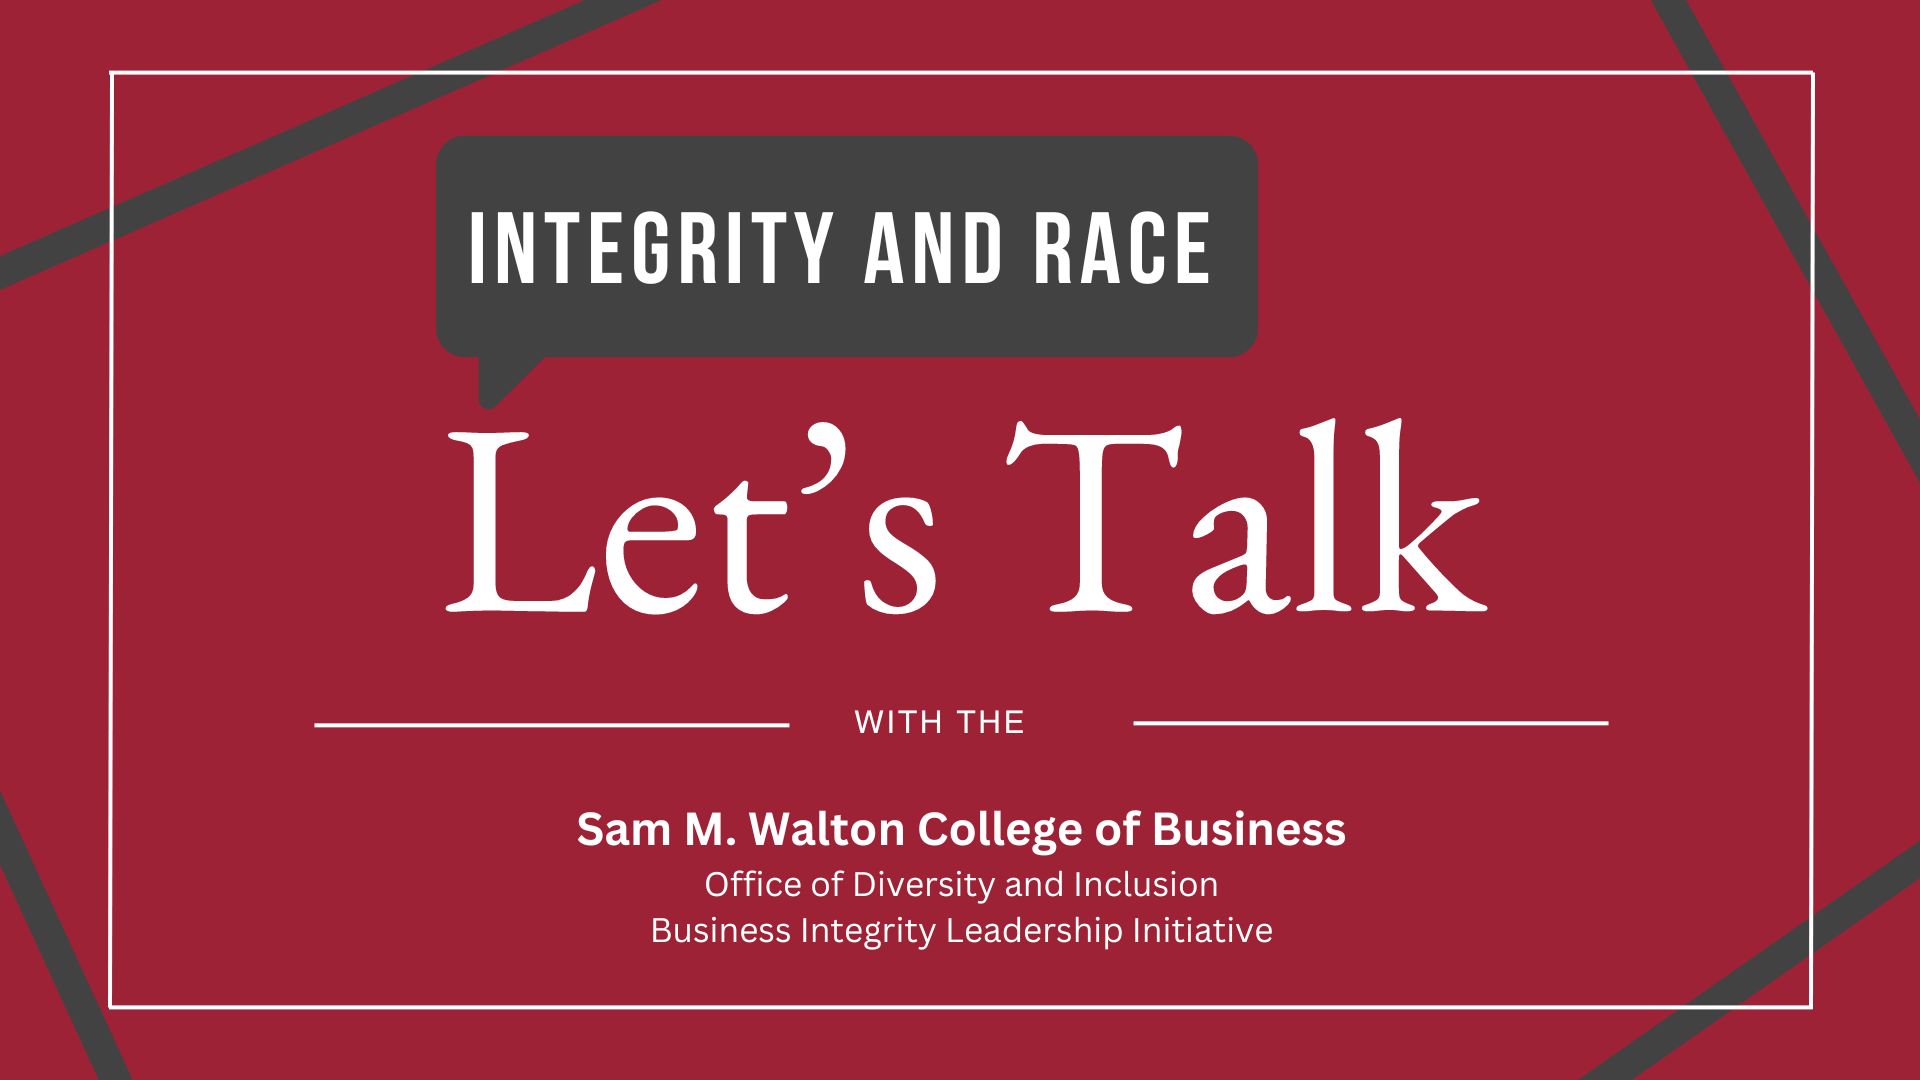 Let's Talk about Integrity and Race